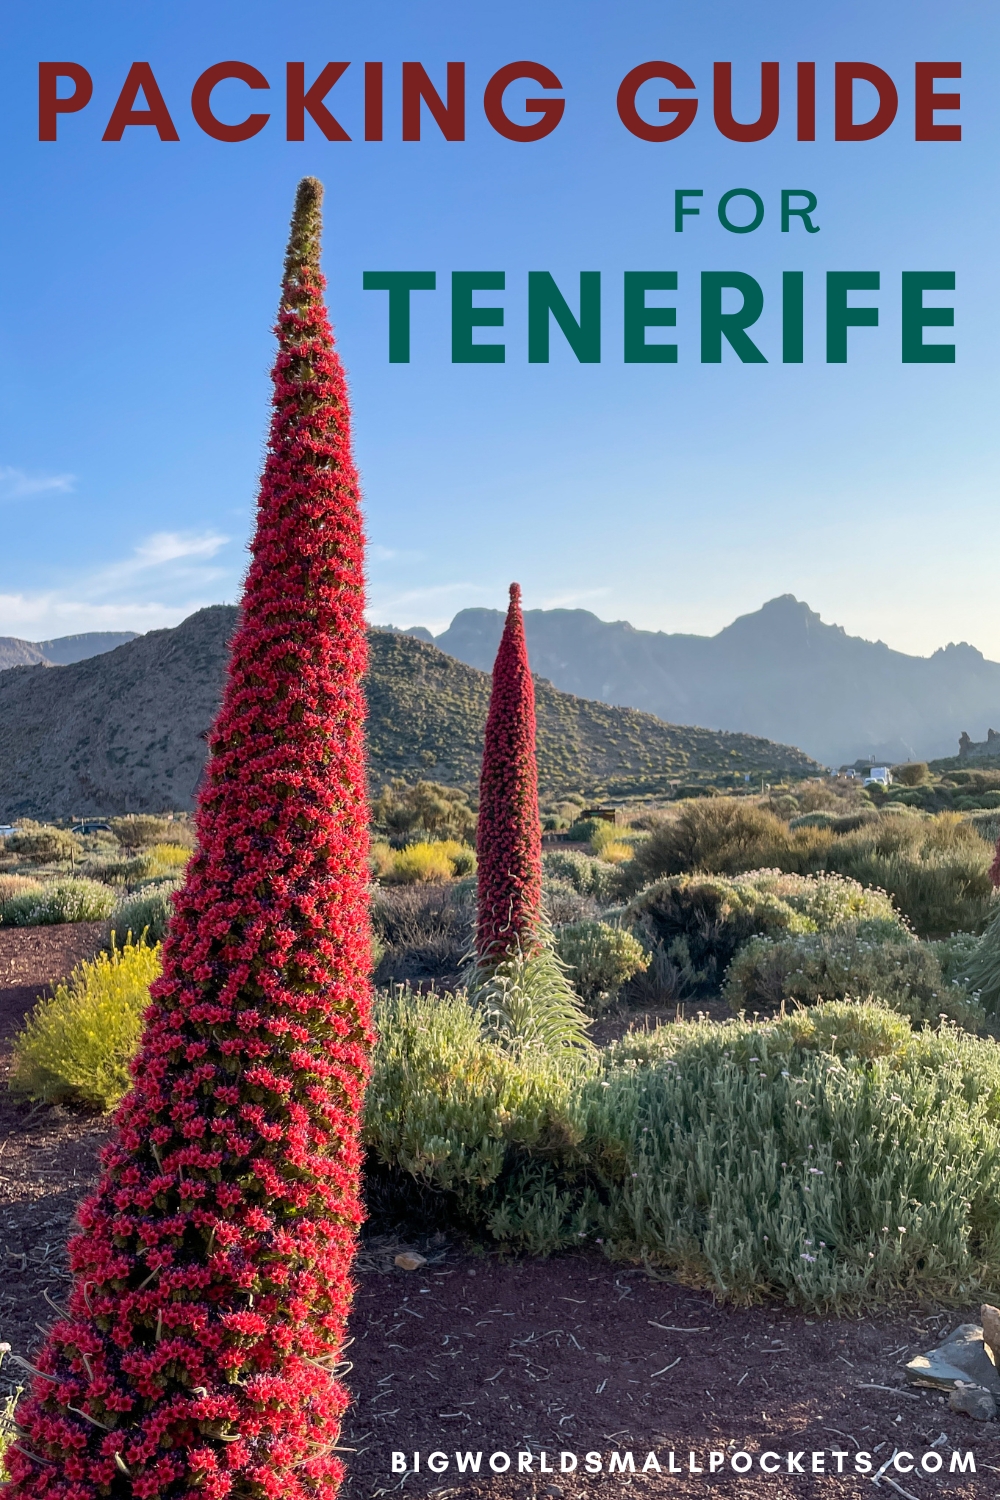 Packing Guide for Tenerife